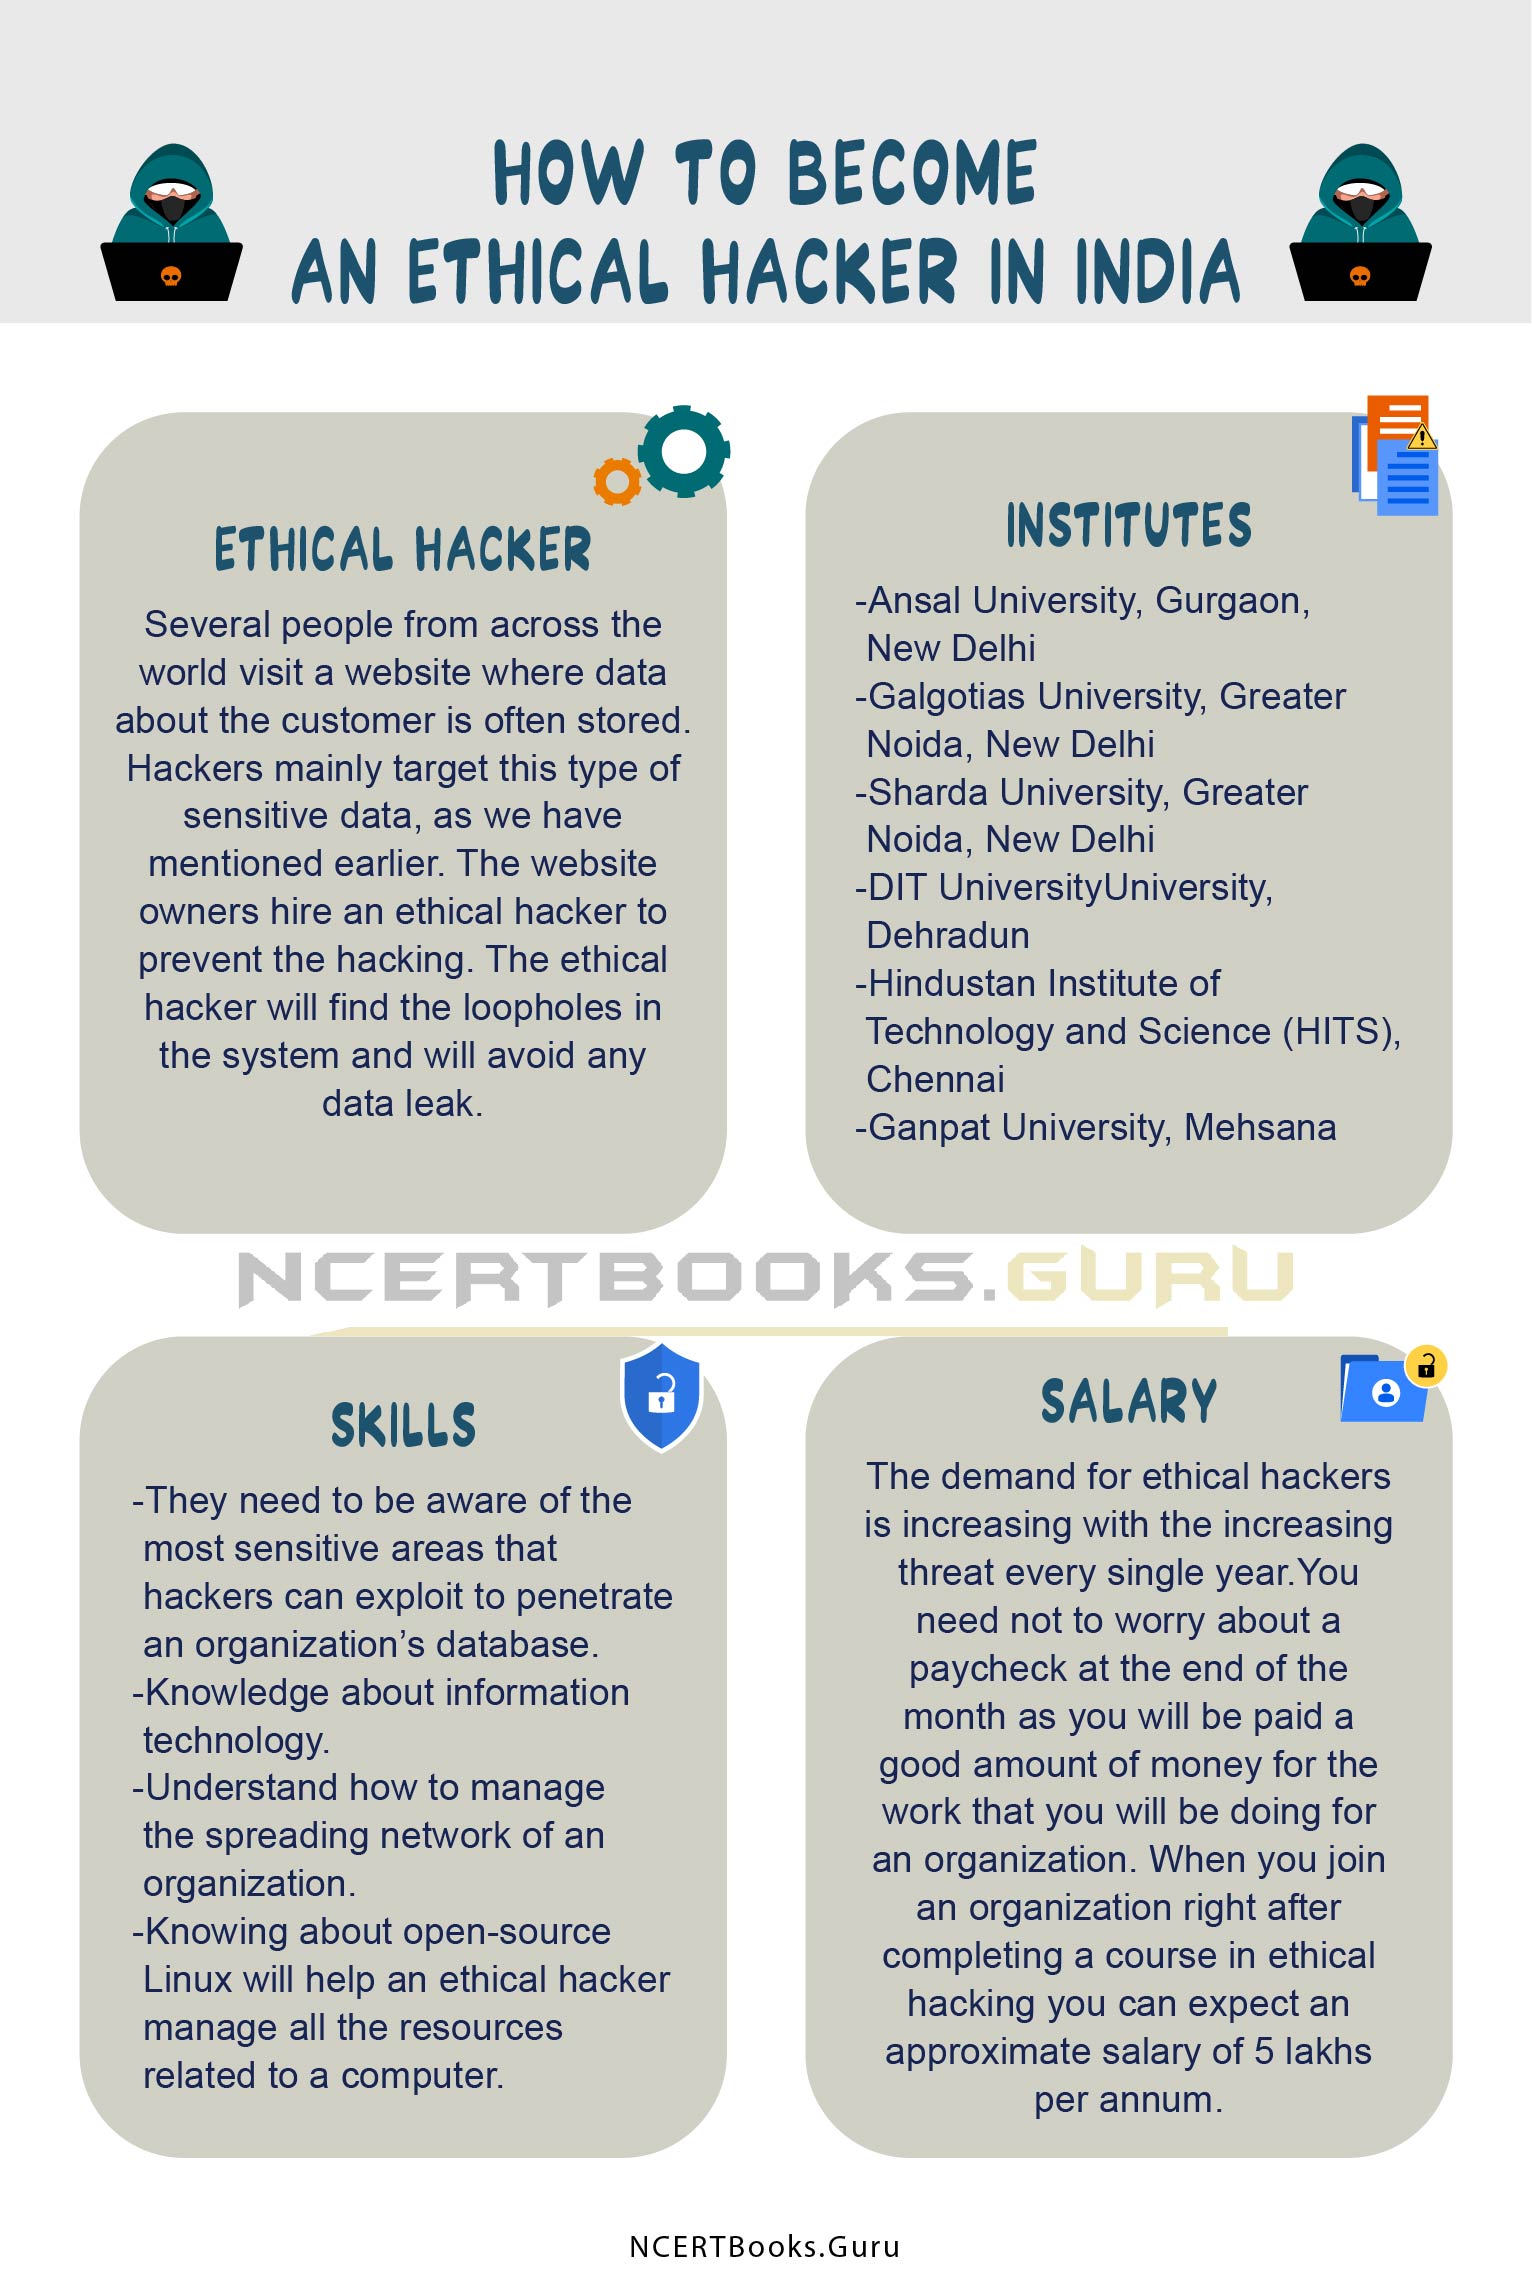 How to become an Ethical Hacker in India